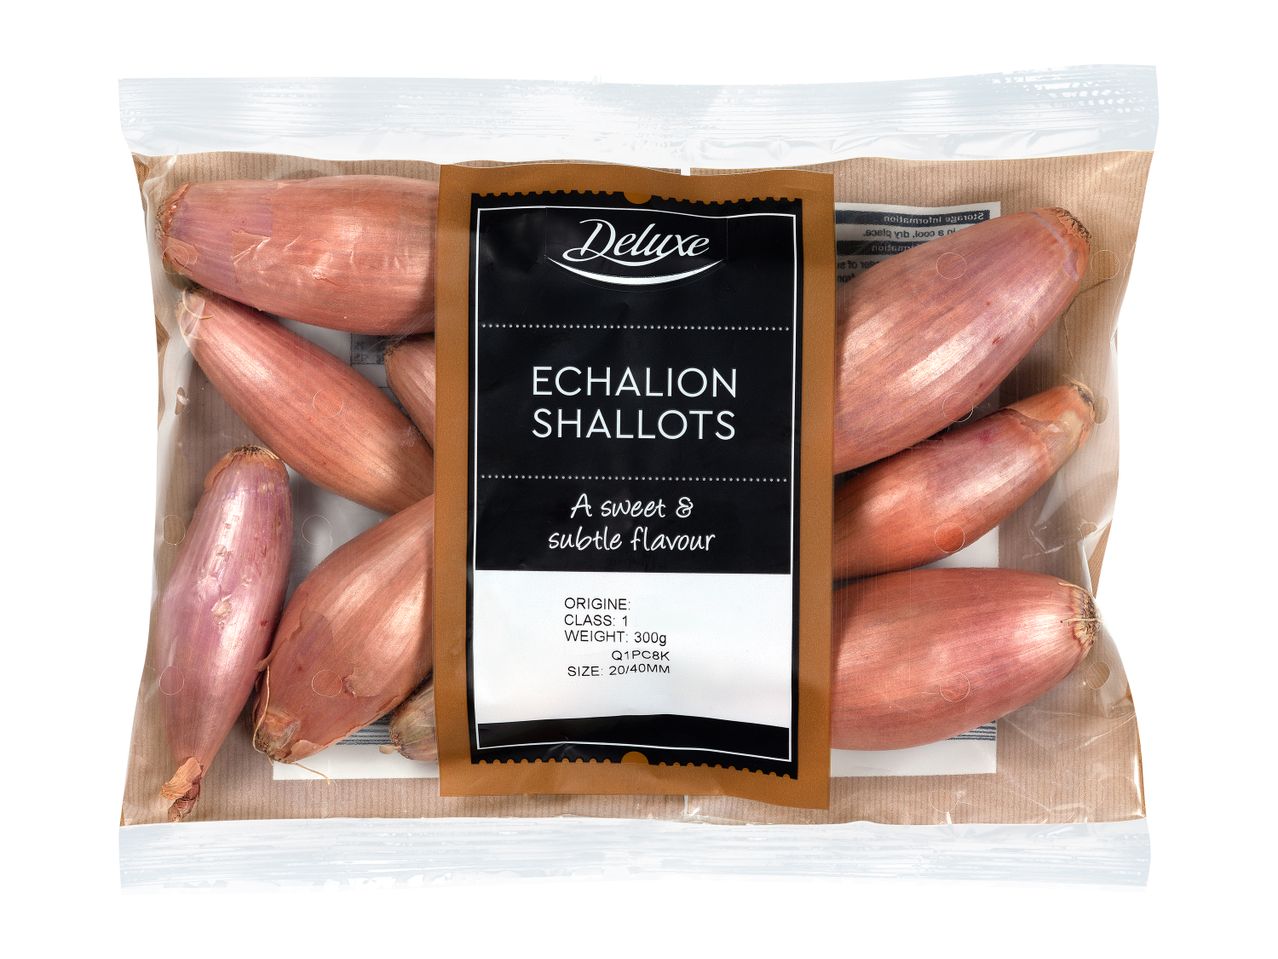 Go to full screen view: Deluxe Echalion Shallots - Image 2